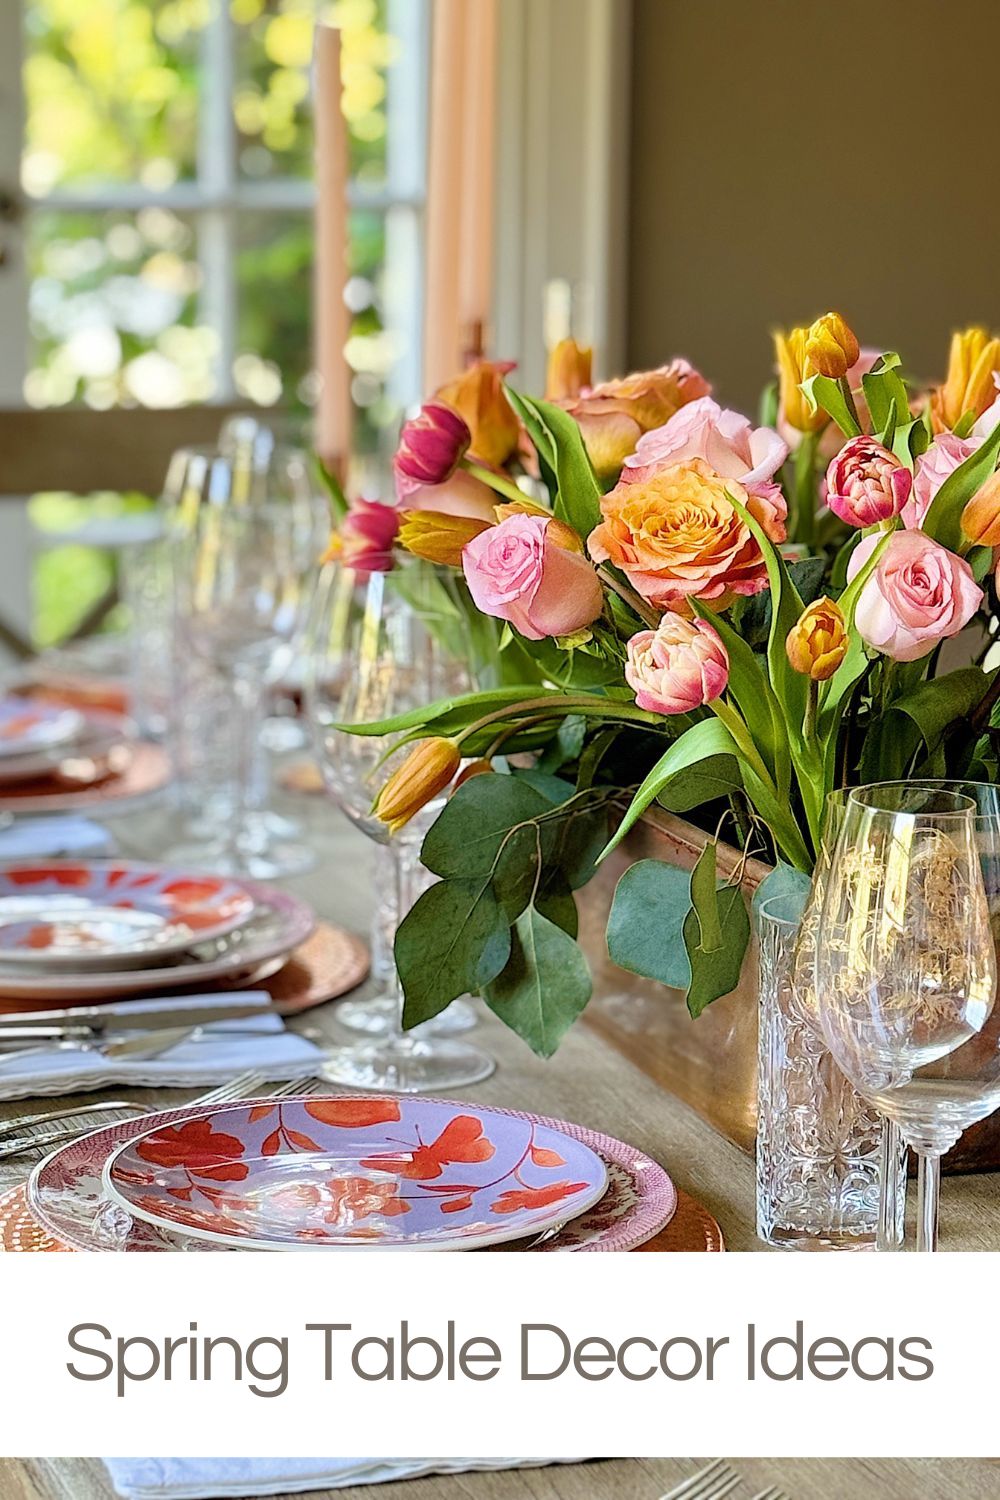 Spring is the perfect time to gather friends and loved ones for a memorable dinner party with good food, great conversation, and beautiful table decor ideas.